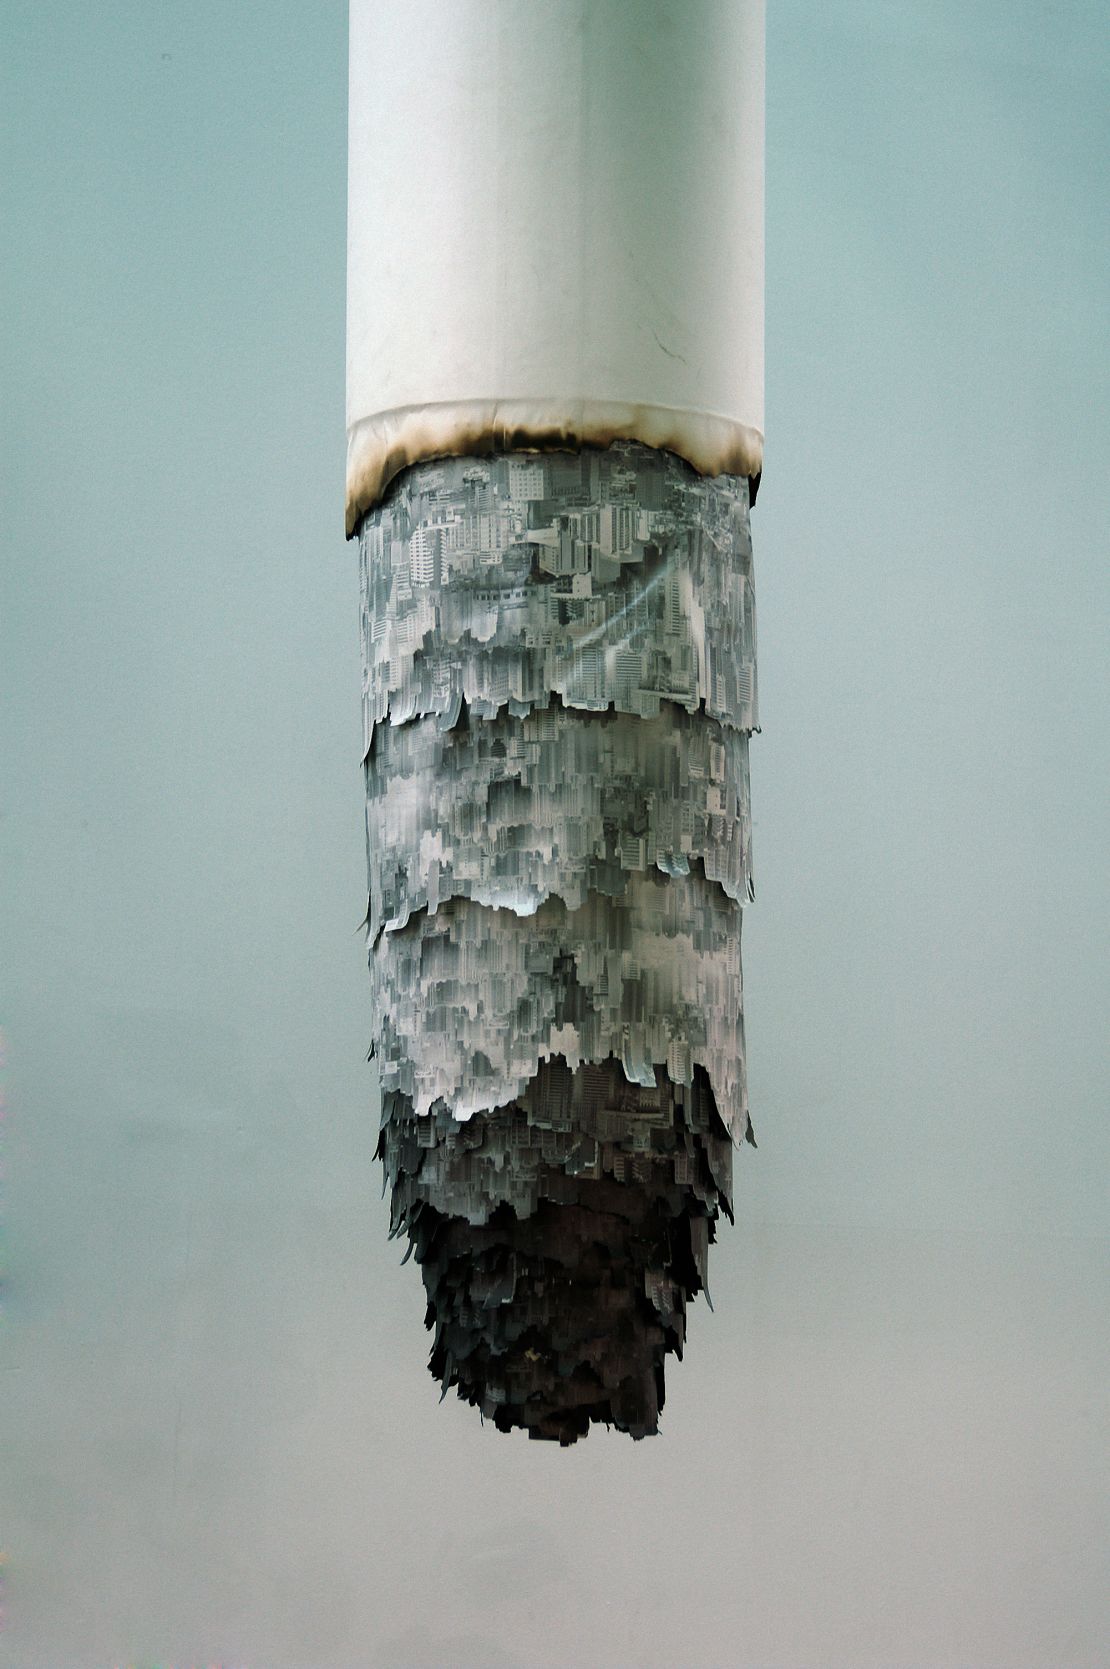 For this installation, Yang printed cityscapes on canvas and hung them from a PVC tube to resemble a large cigarette